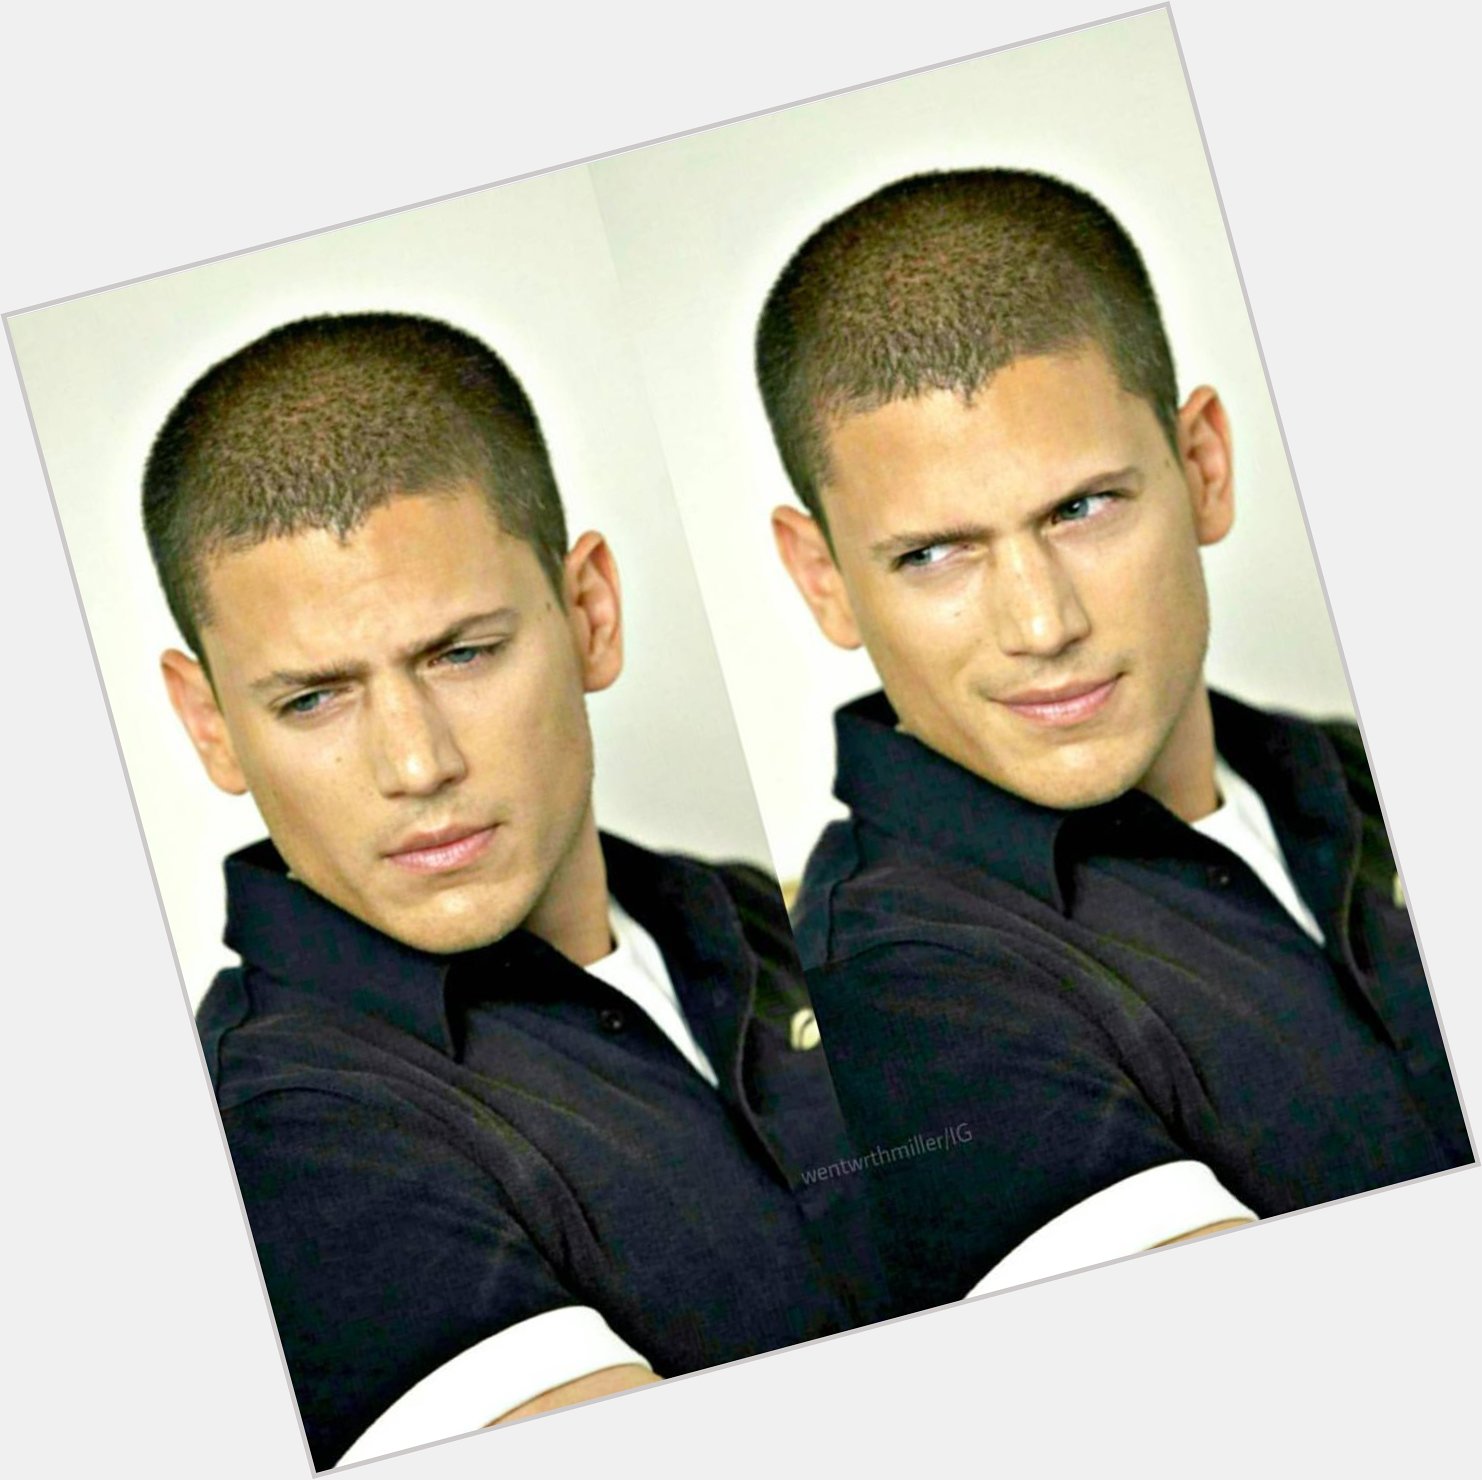 Happy birthday to Wentworth Miller again! He\s such an beautiful, inspiring and amazing person!  